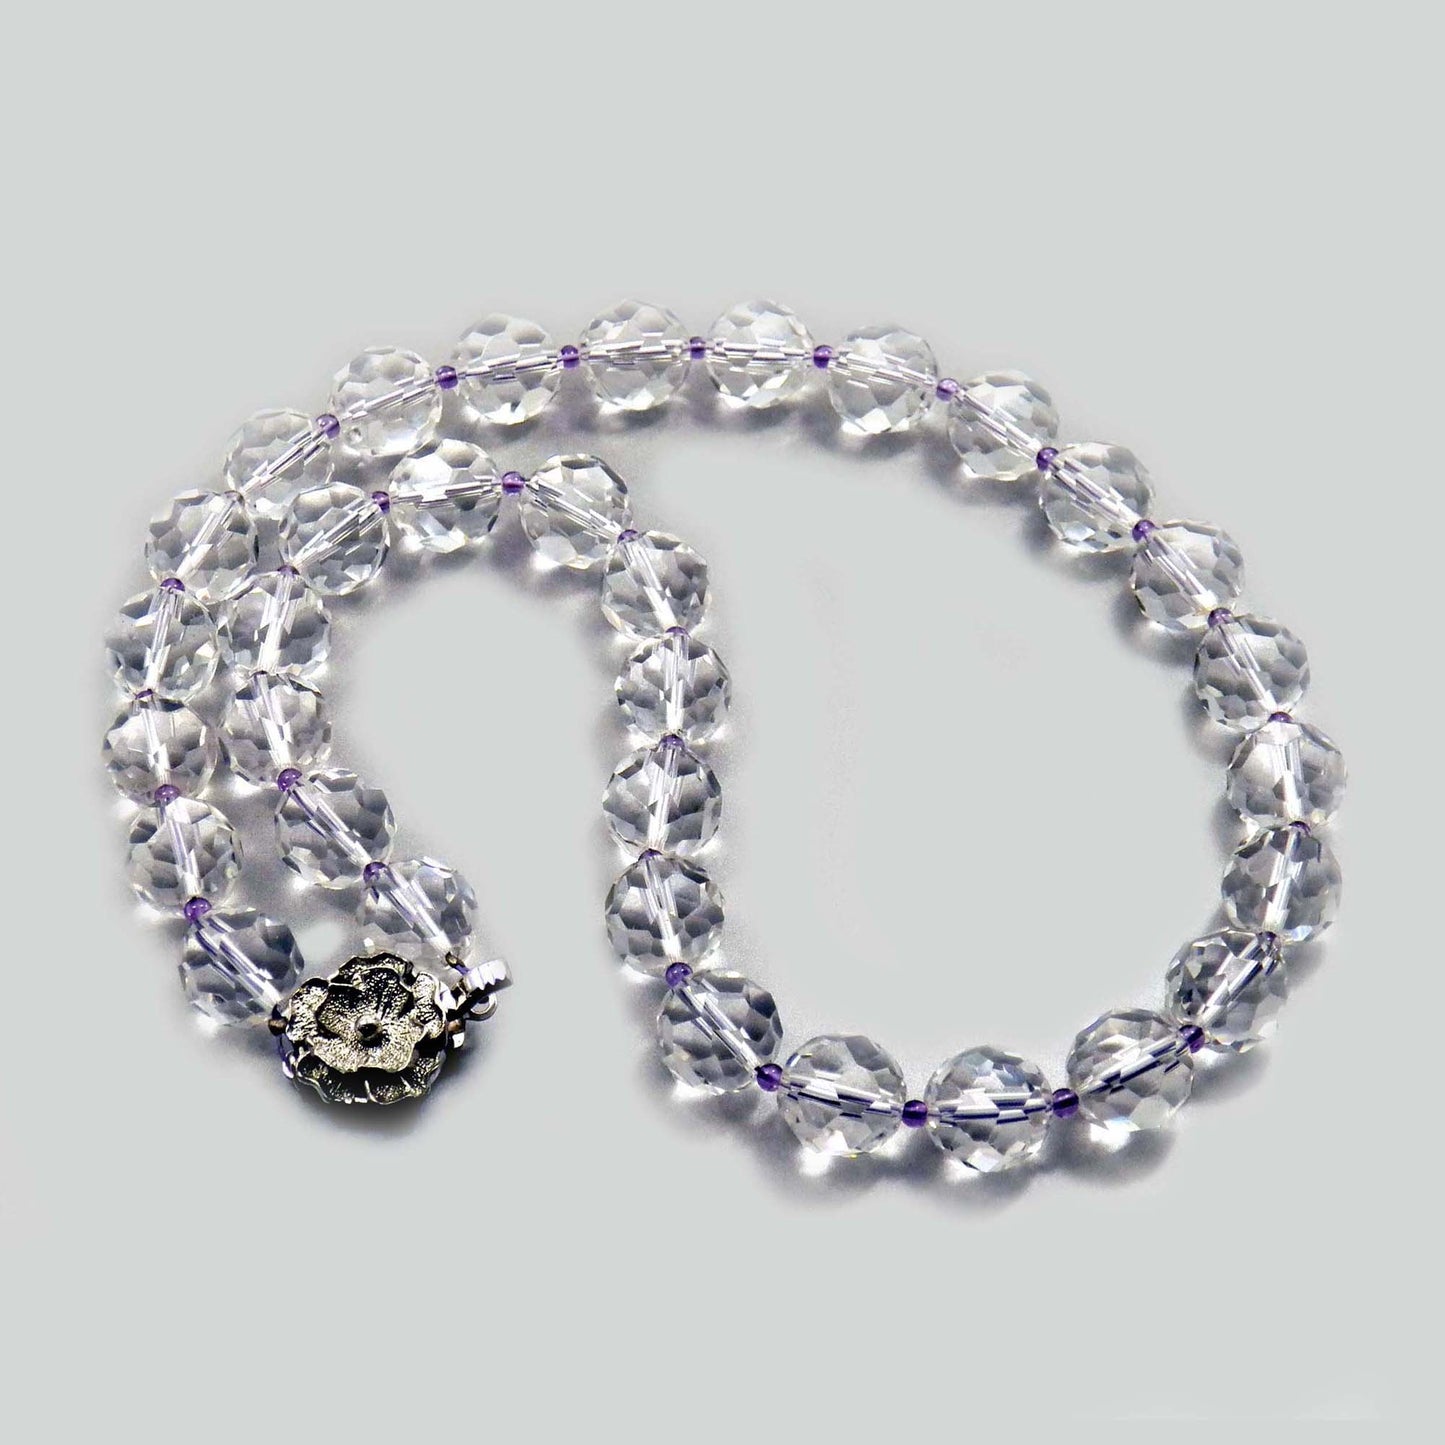 Faceted Clear Quartz and Amethyst Bead Necklace, Silver Clasp, Rock Crystal Vintage Jewelry